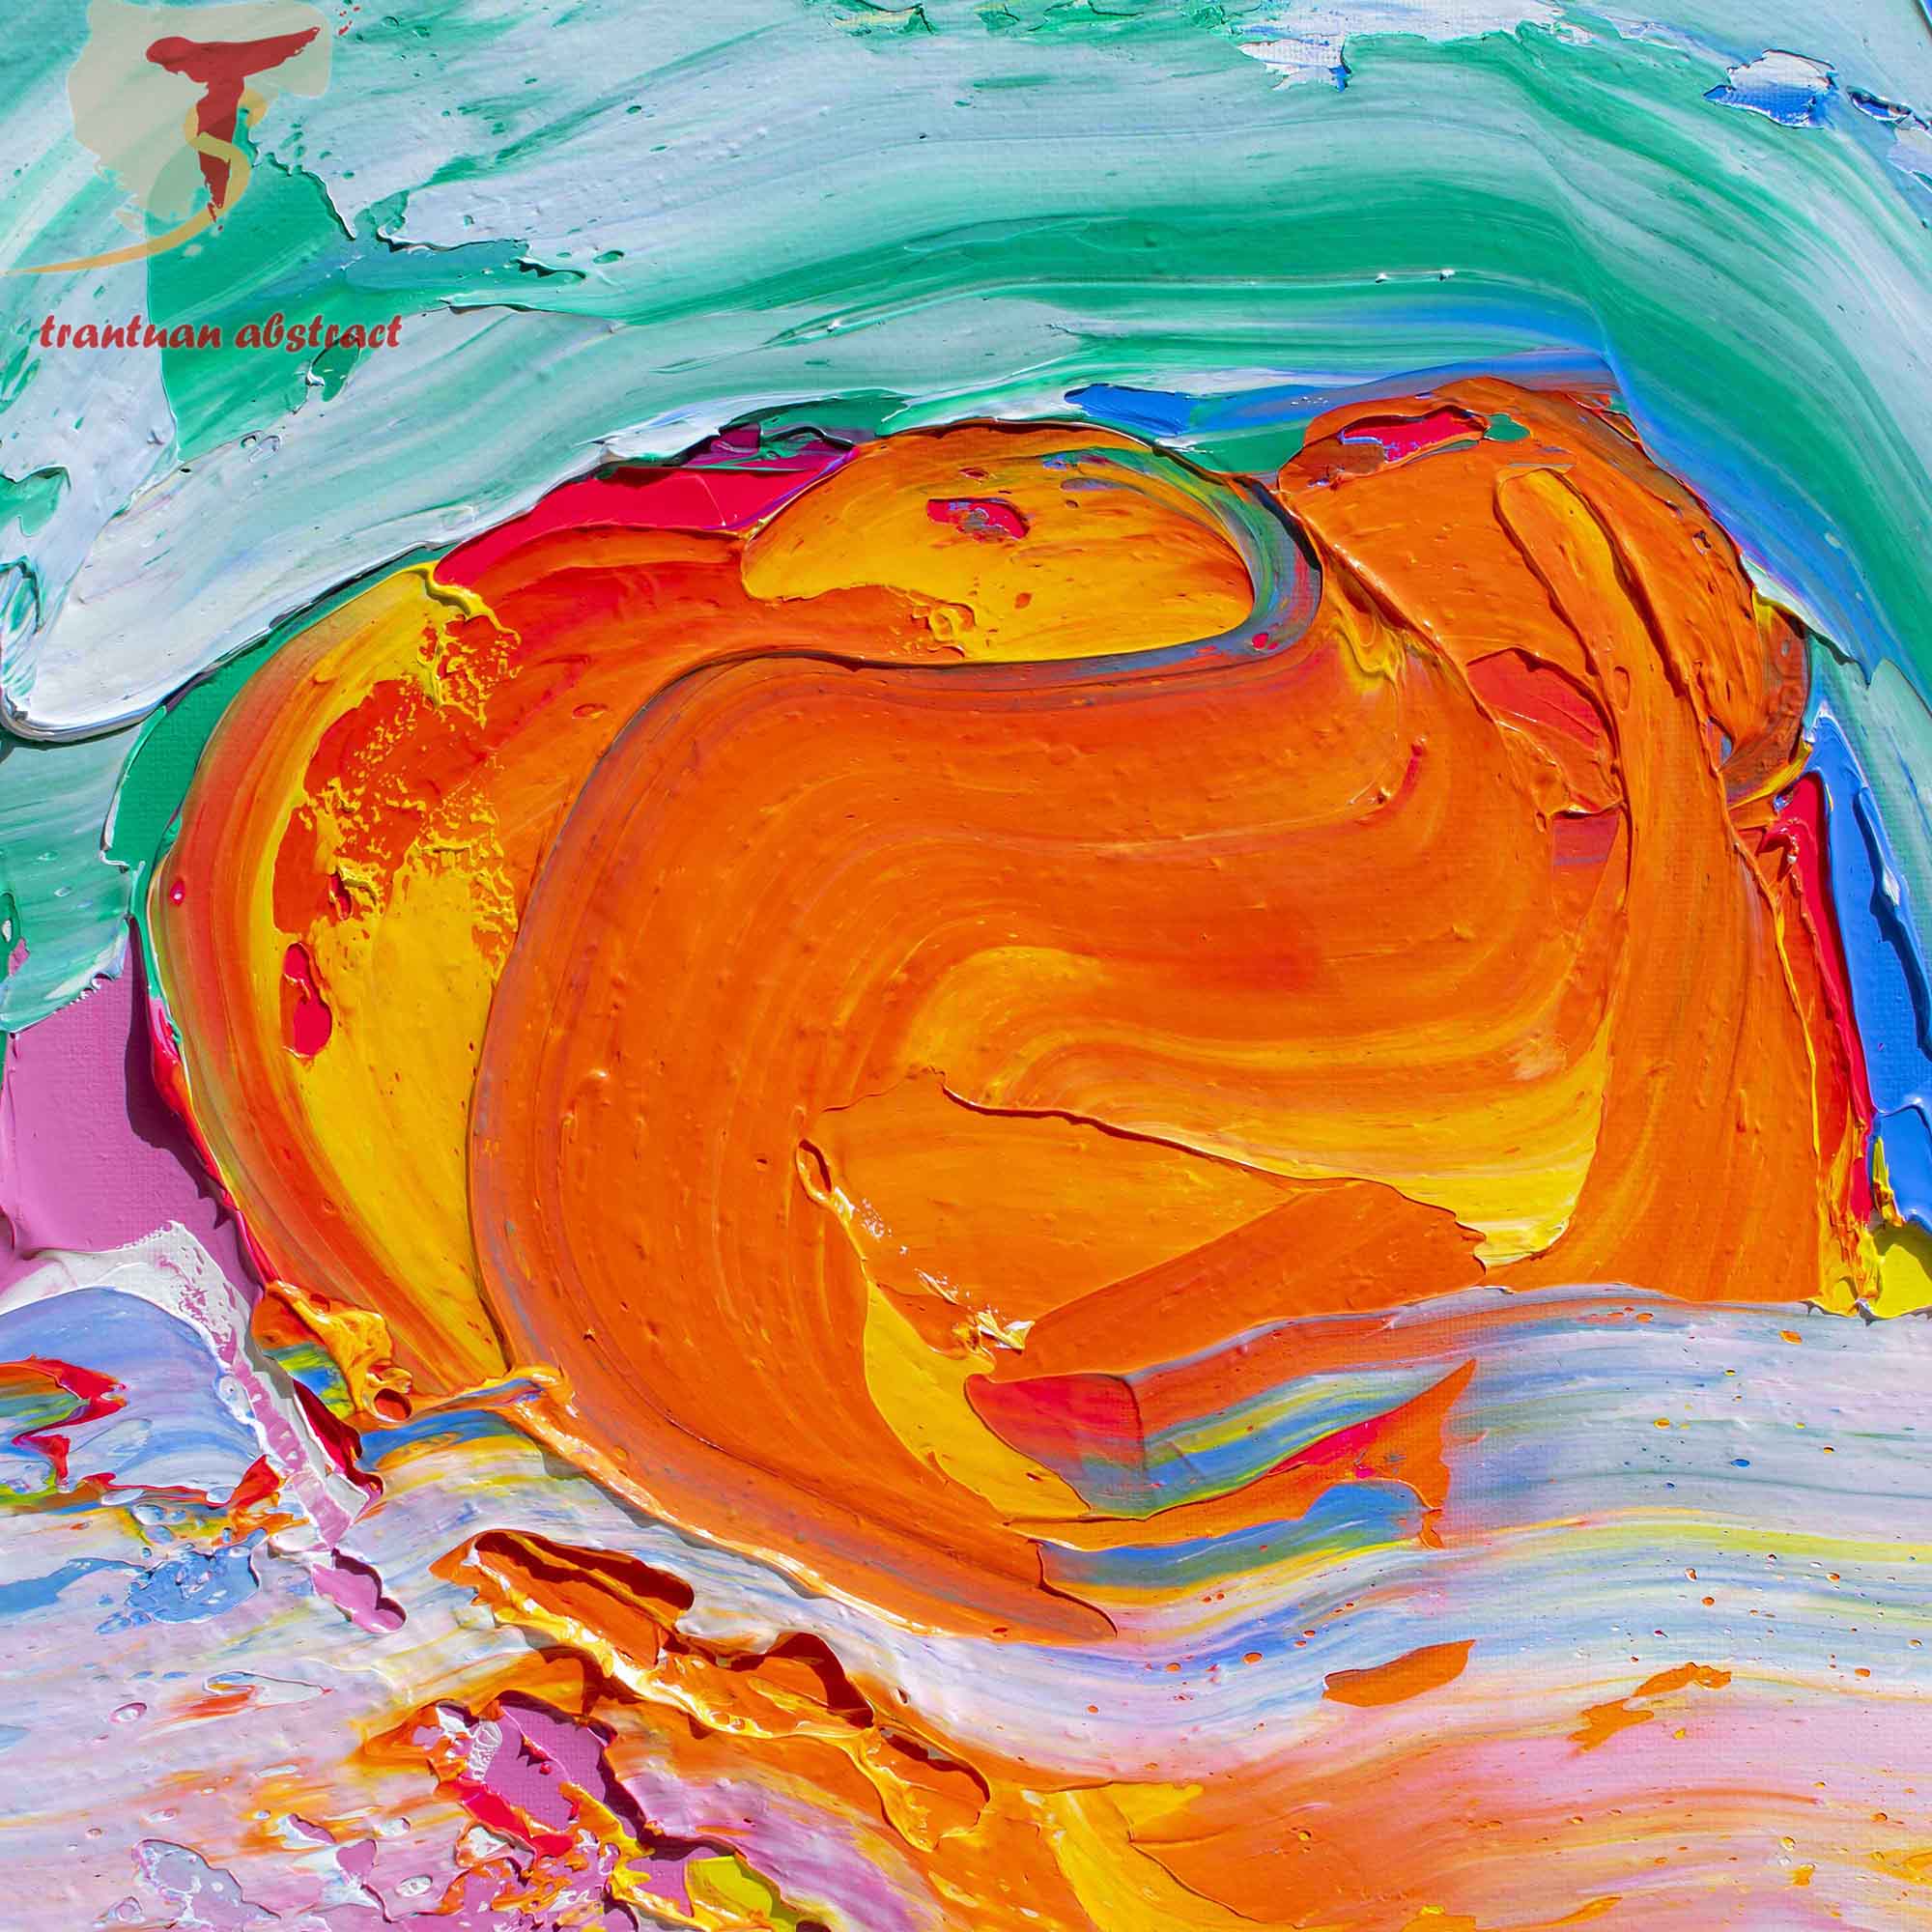 Tran Tuan Abstract Sun on the Waves 2021 135 x 80 x 5 cm Acrylic on Canvas Painting Detail s (27)